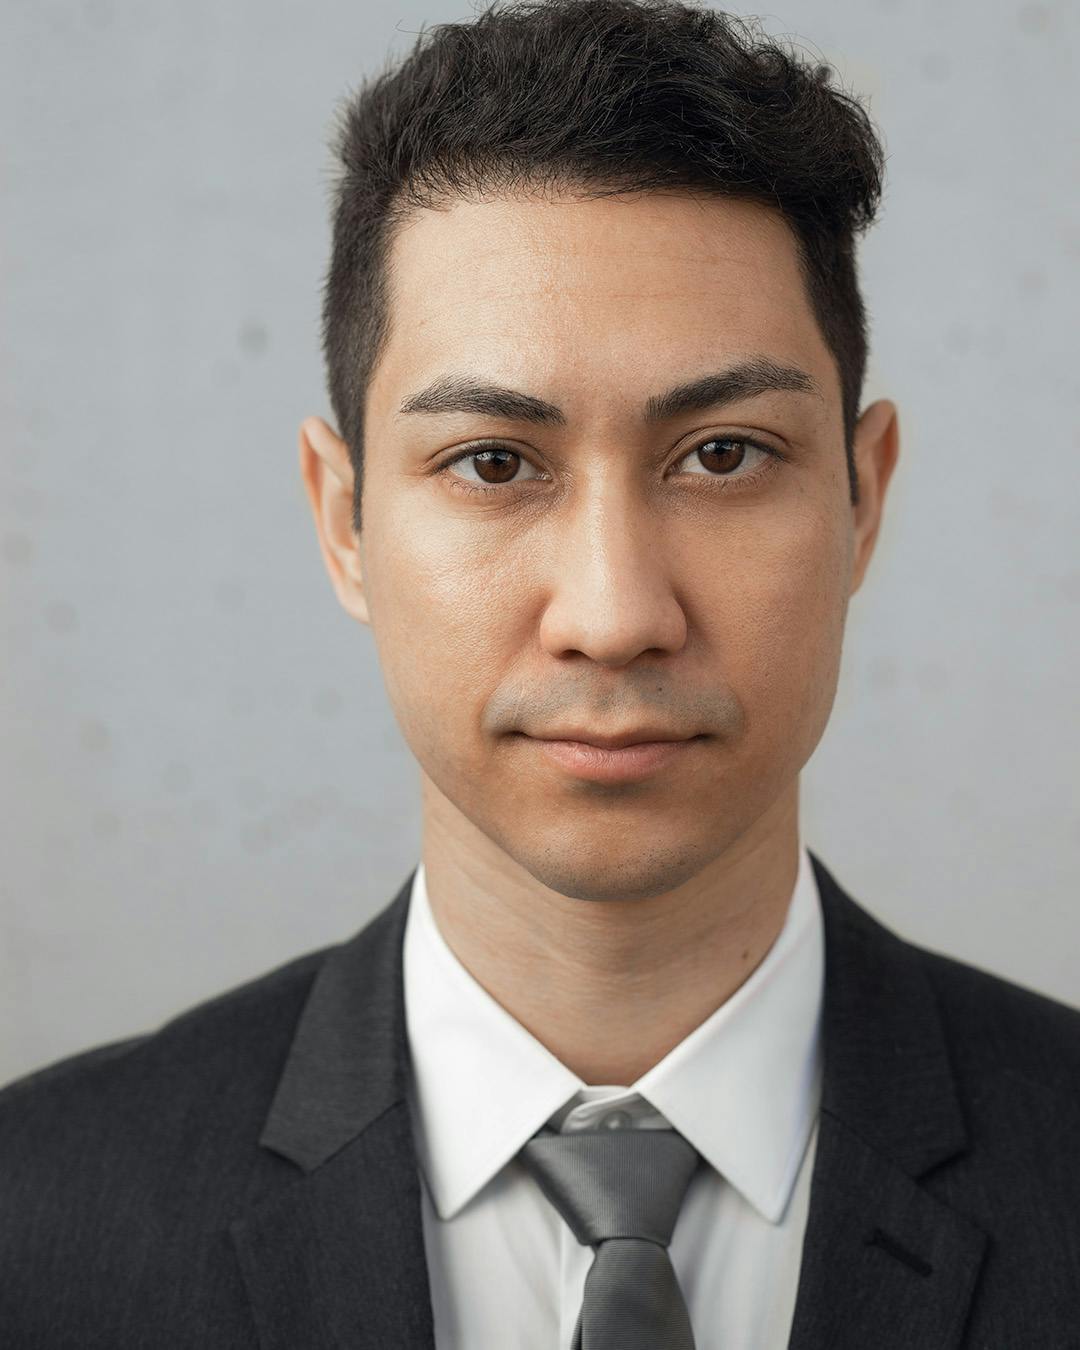 Headshot of a man in a suit.